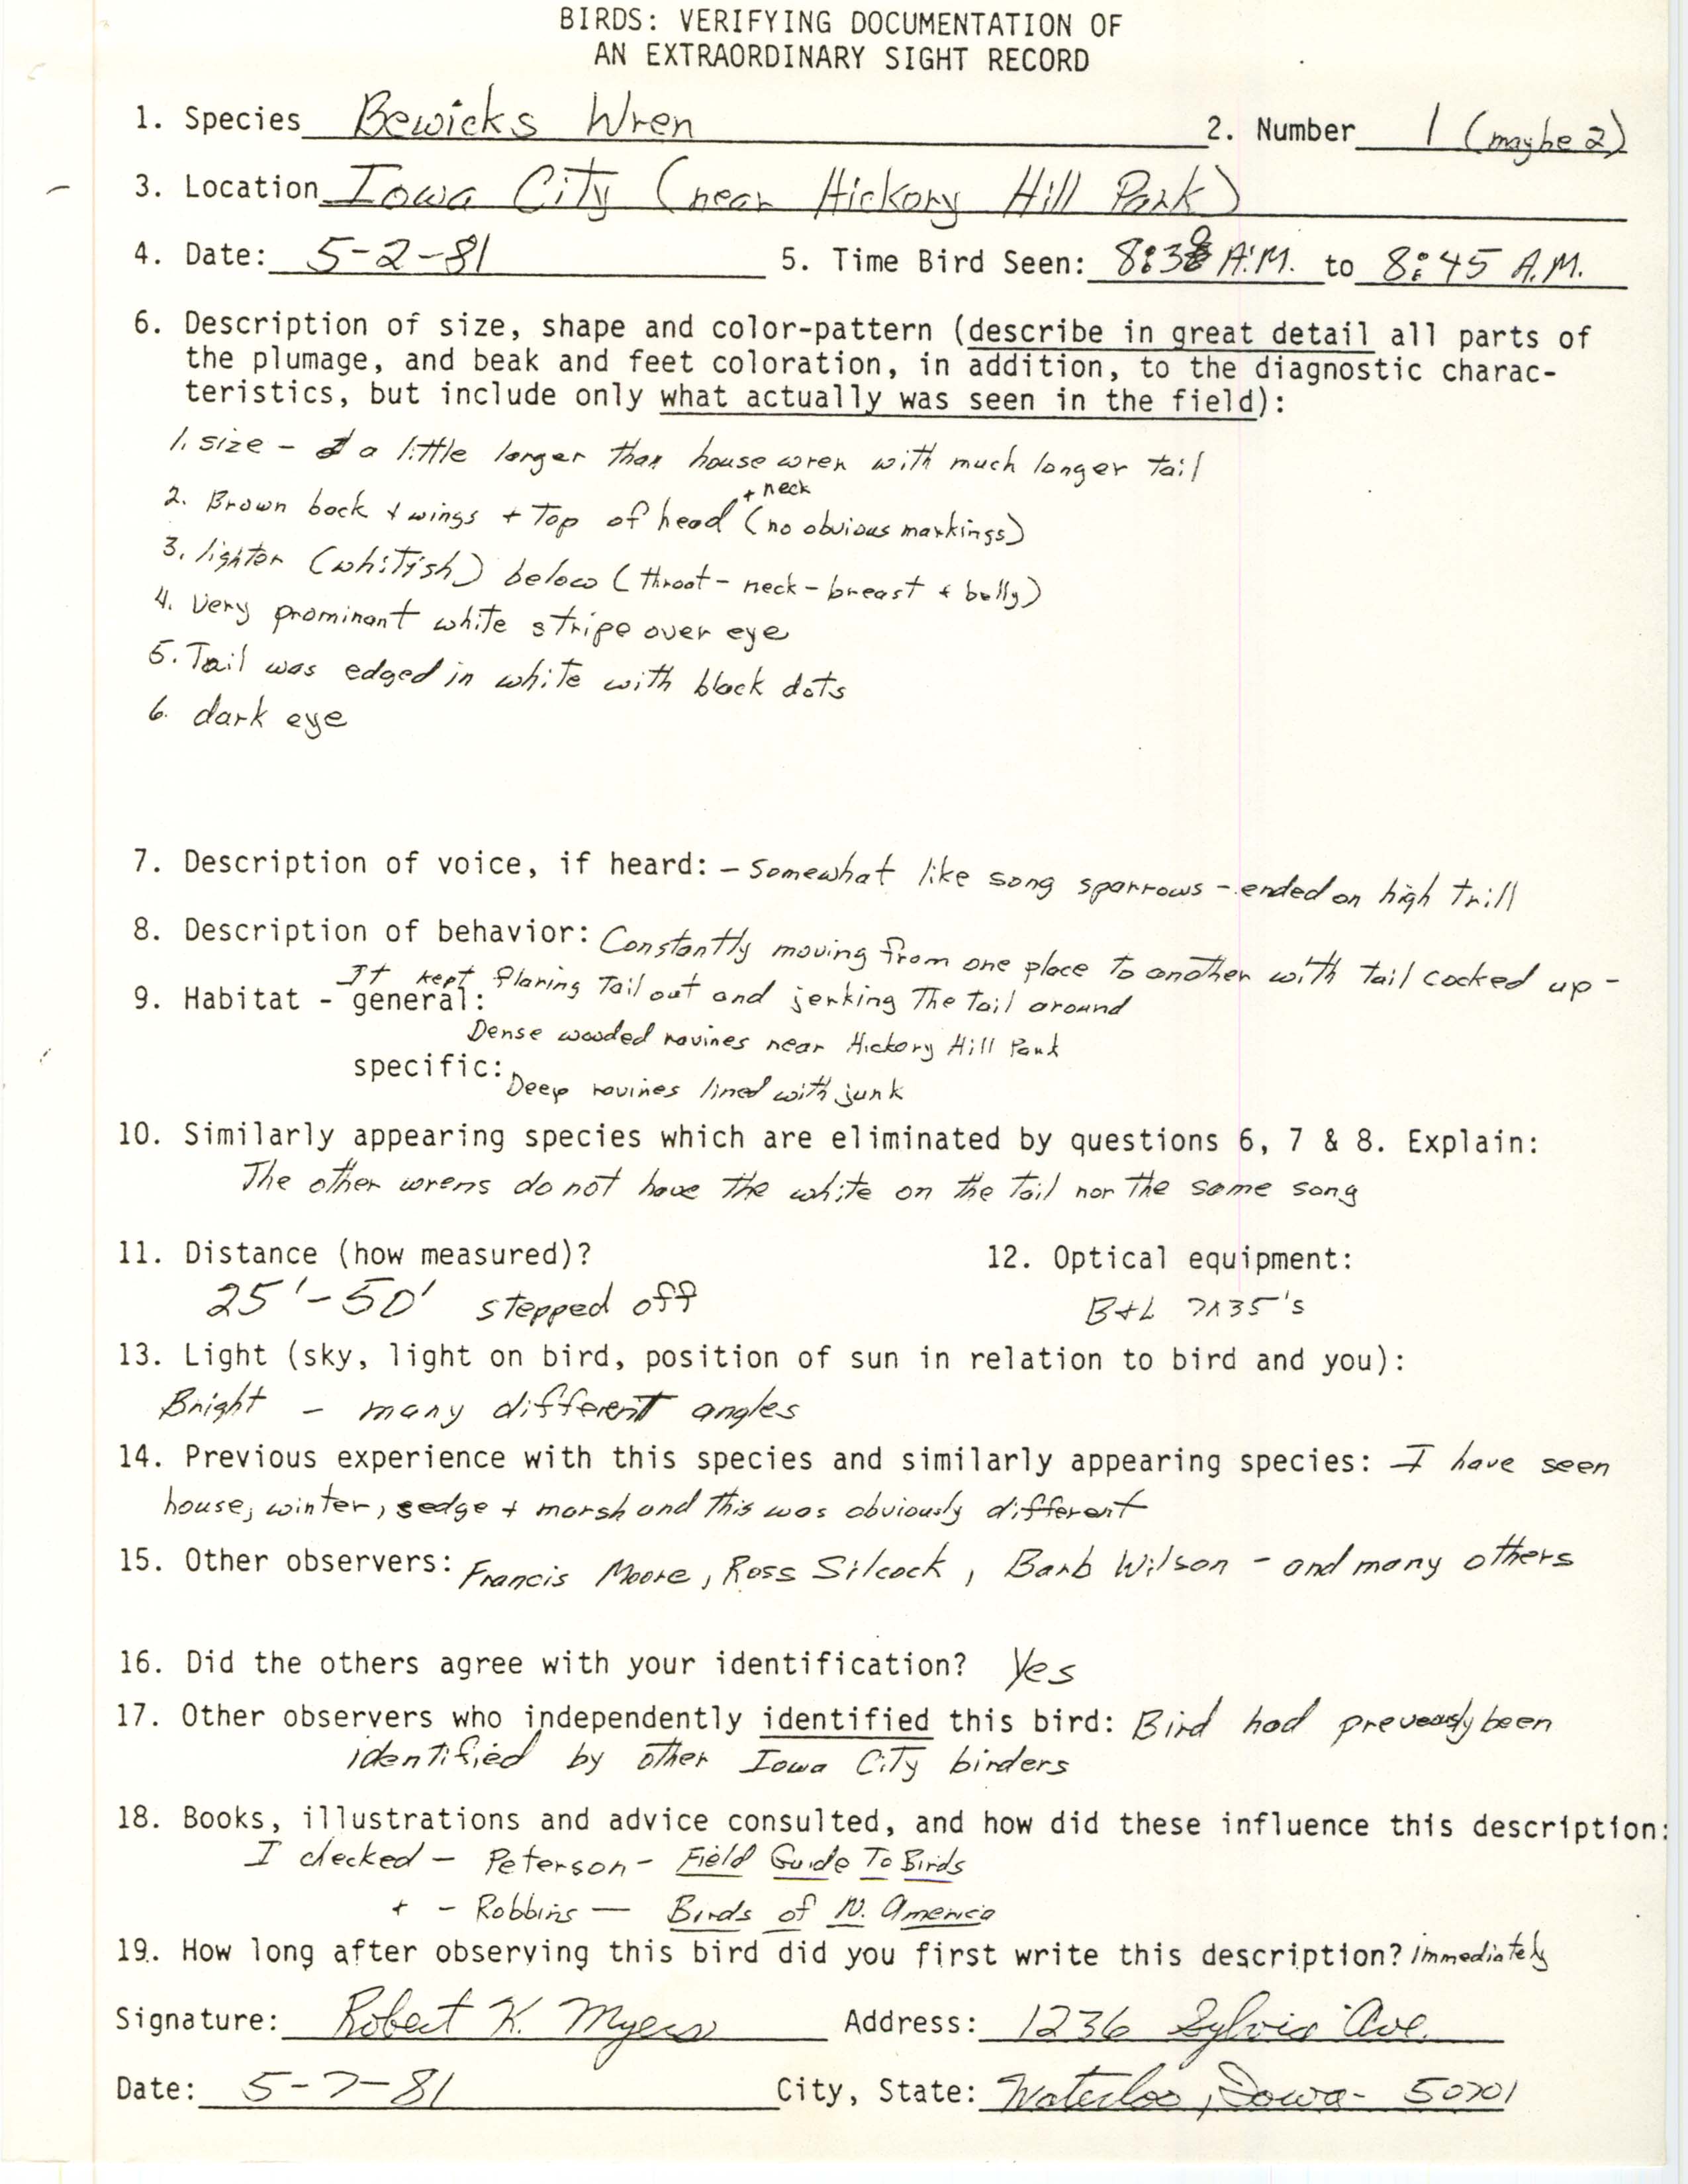 Rare bird documentation form for Bewick's Wren near Hickory Hill Park in Iowa City in 1981